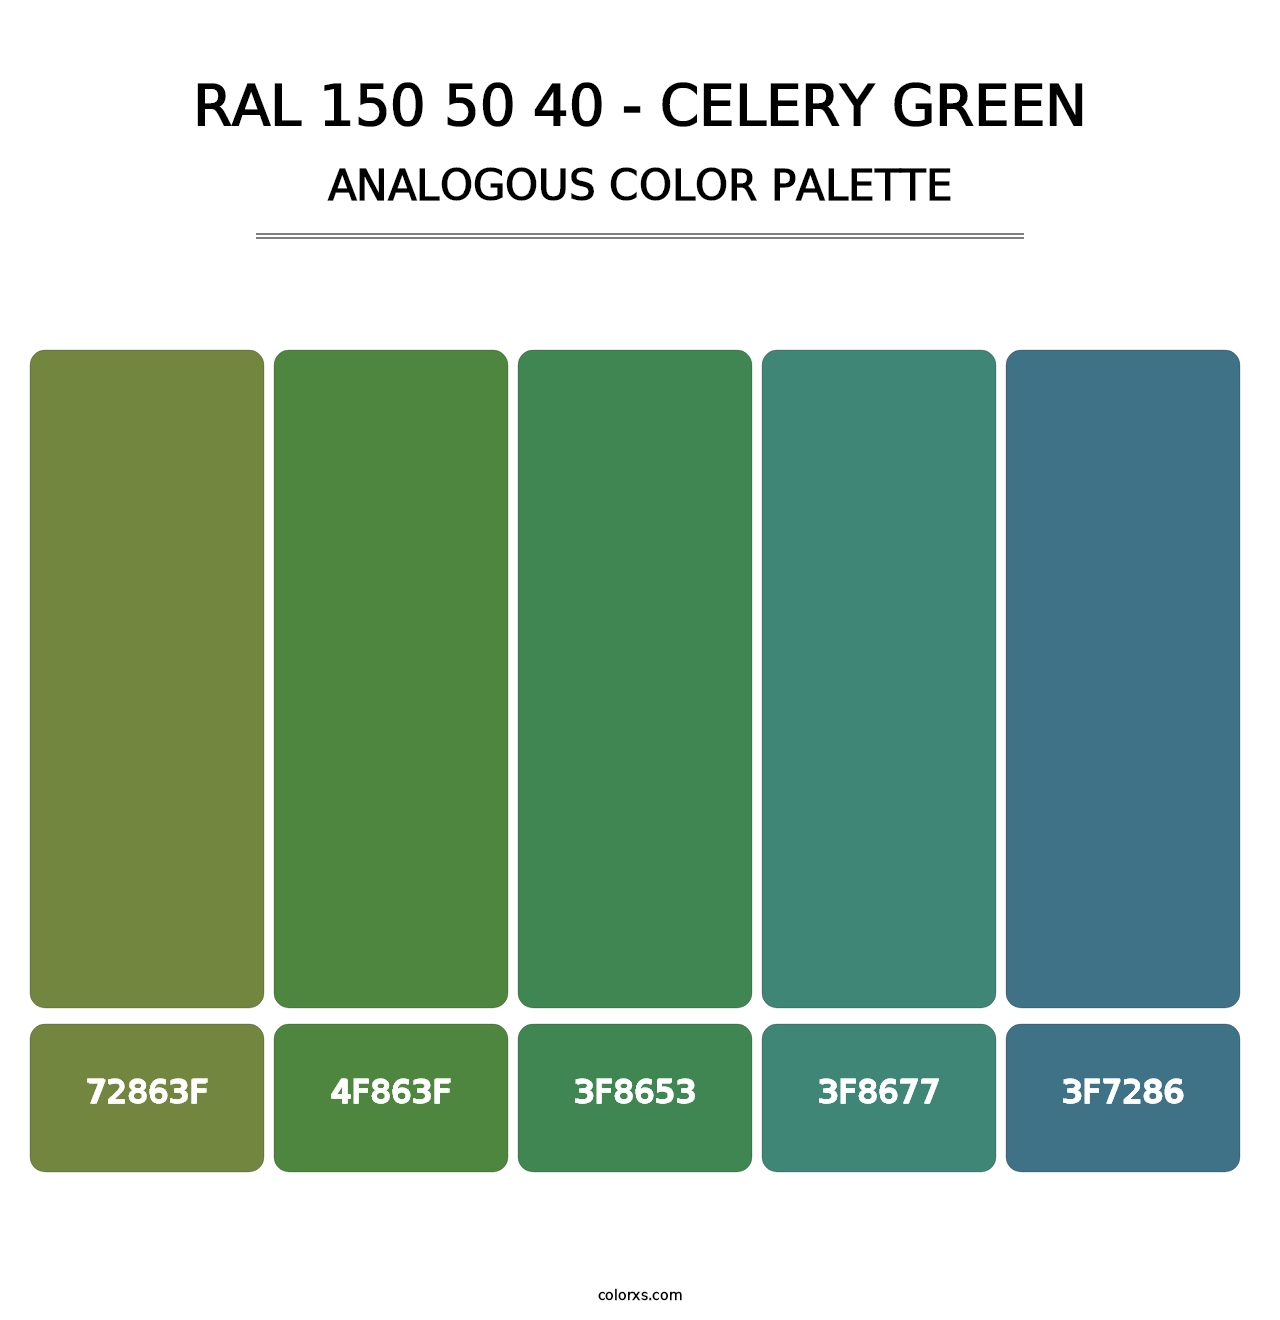 RAL 150 50 40 - Celery Green - Analogous Color Palette